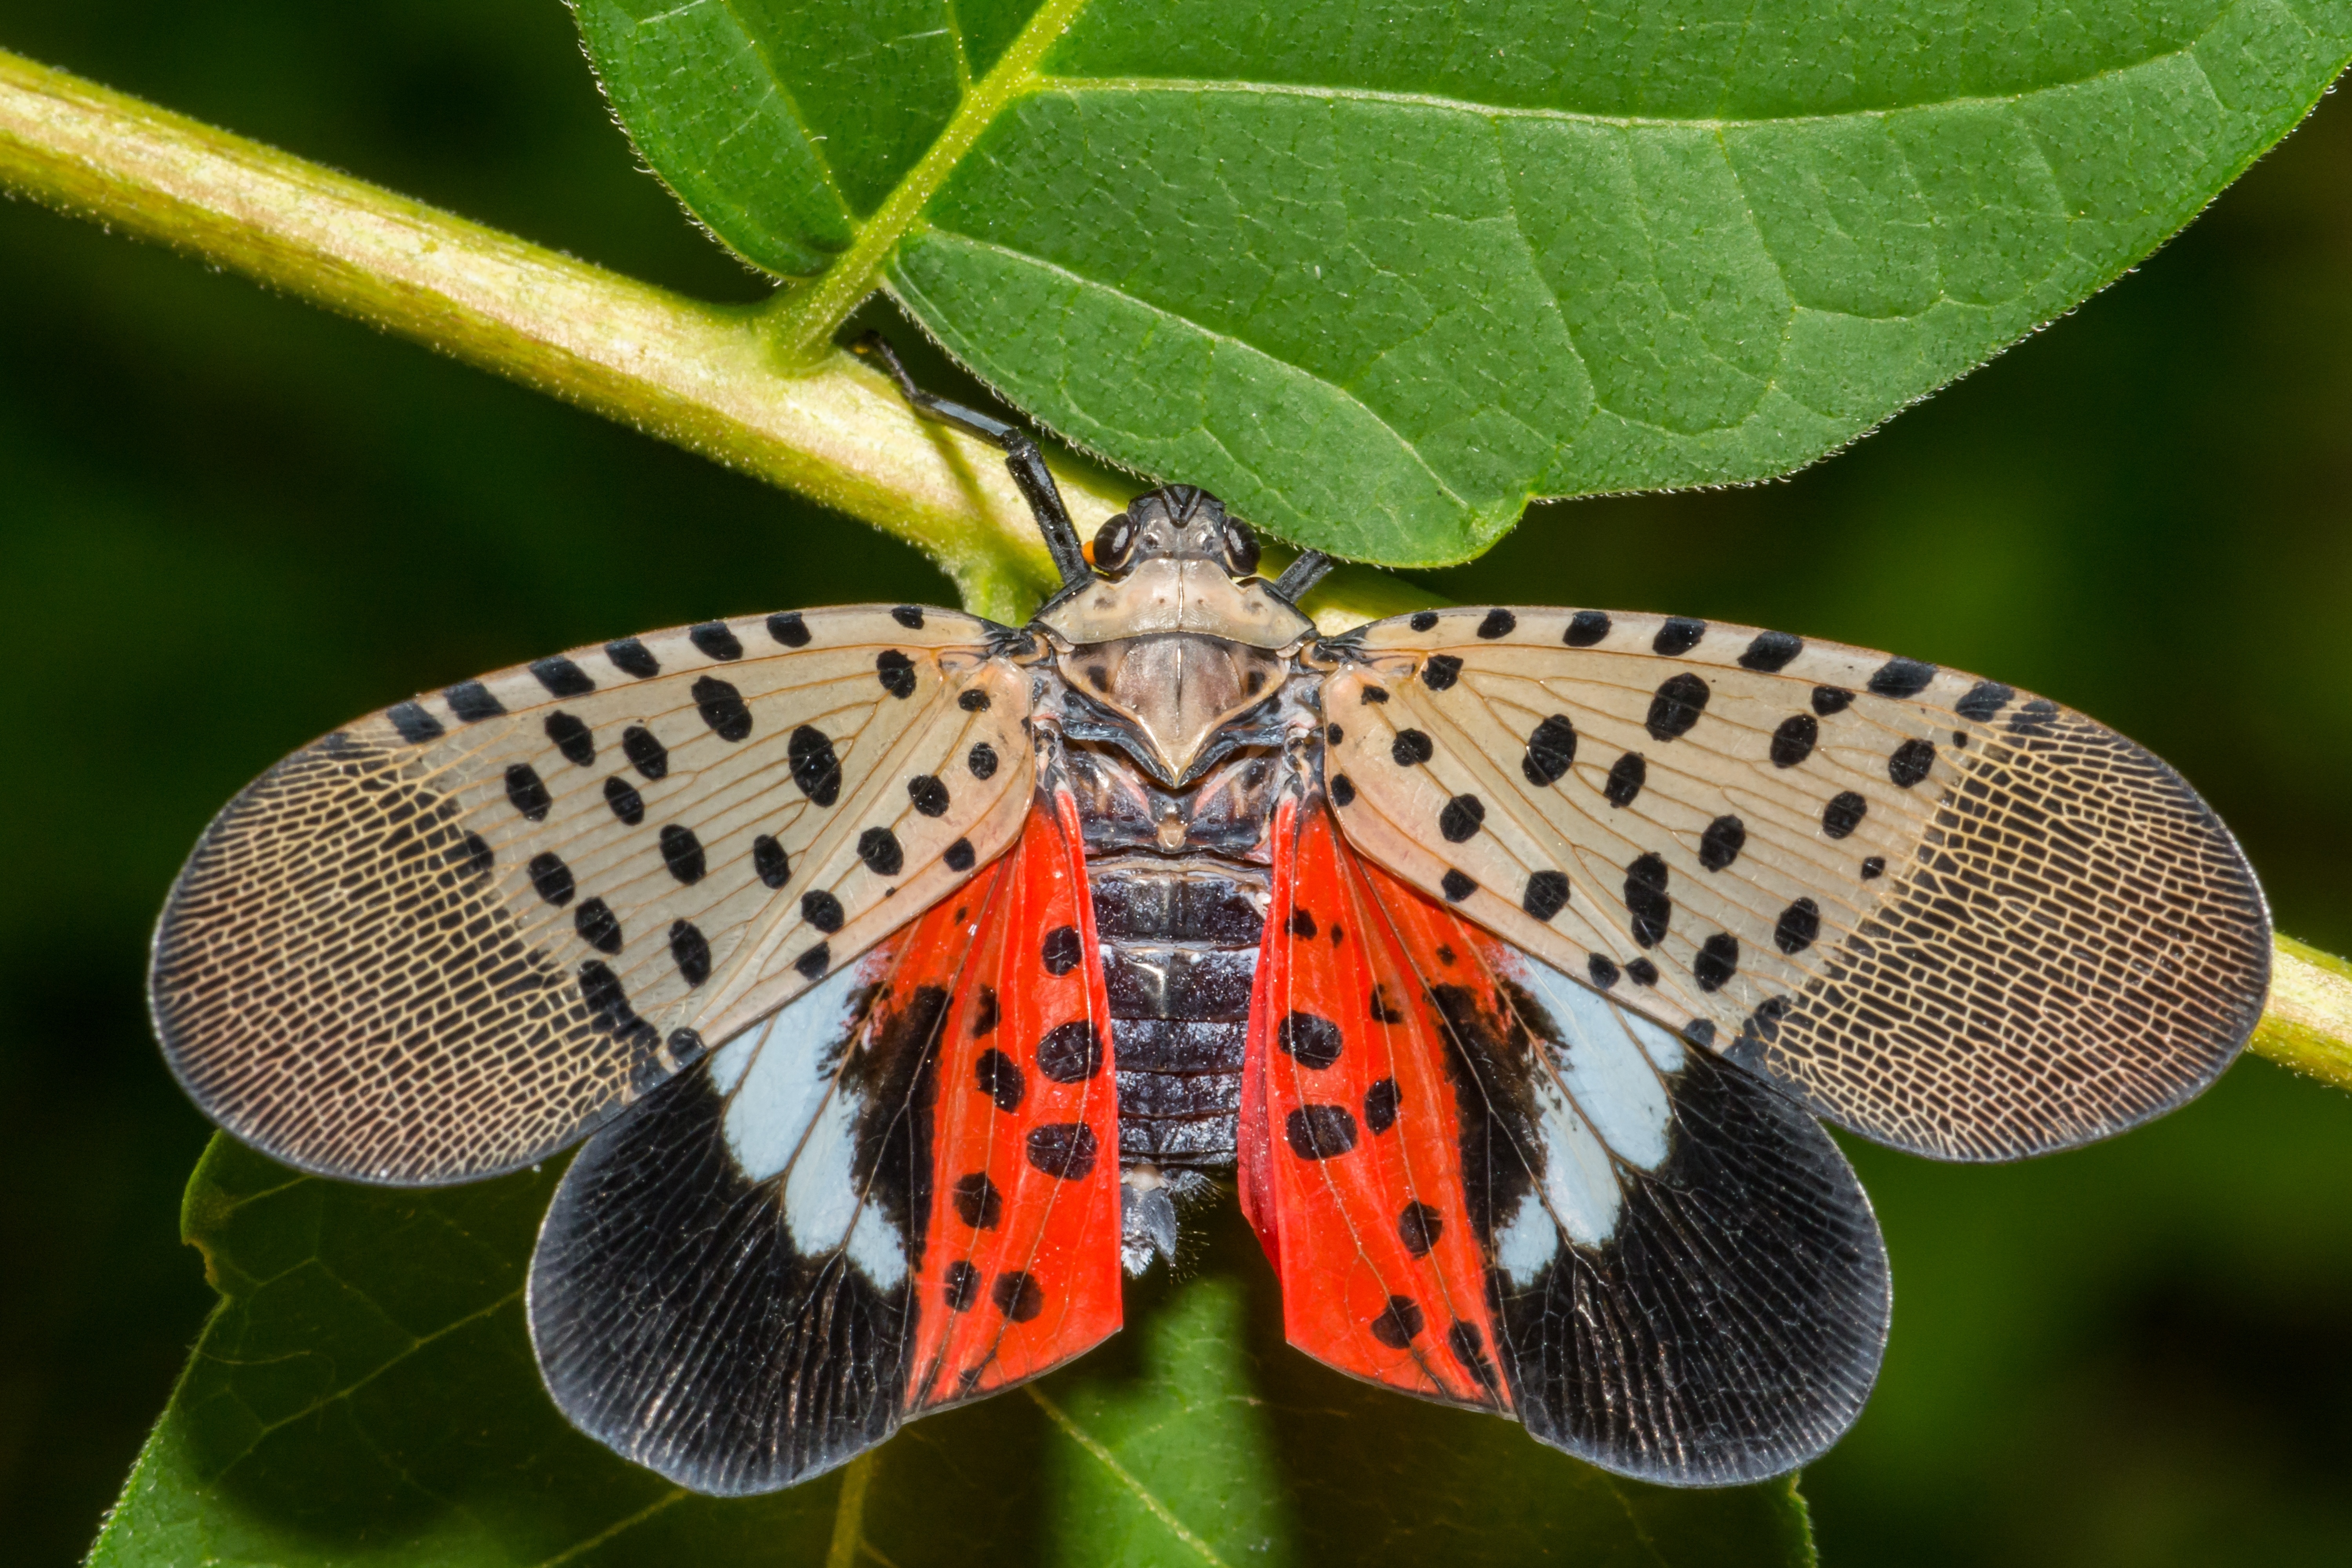 What To Do When You Find a Spotted Lanternfly